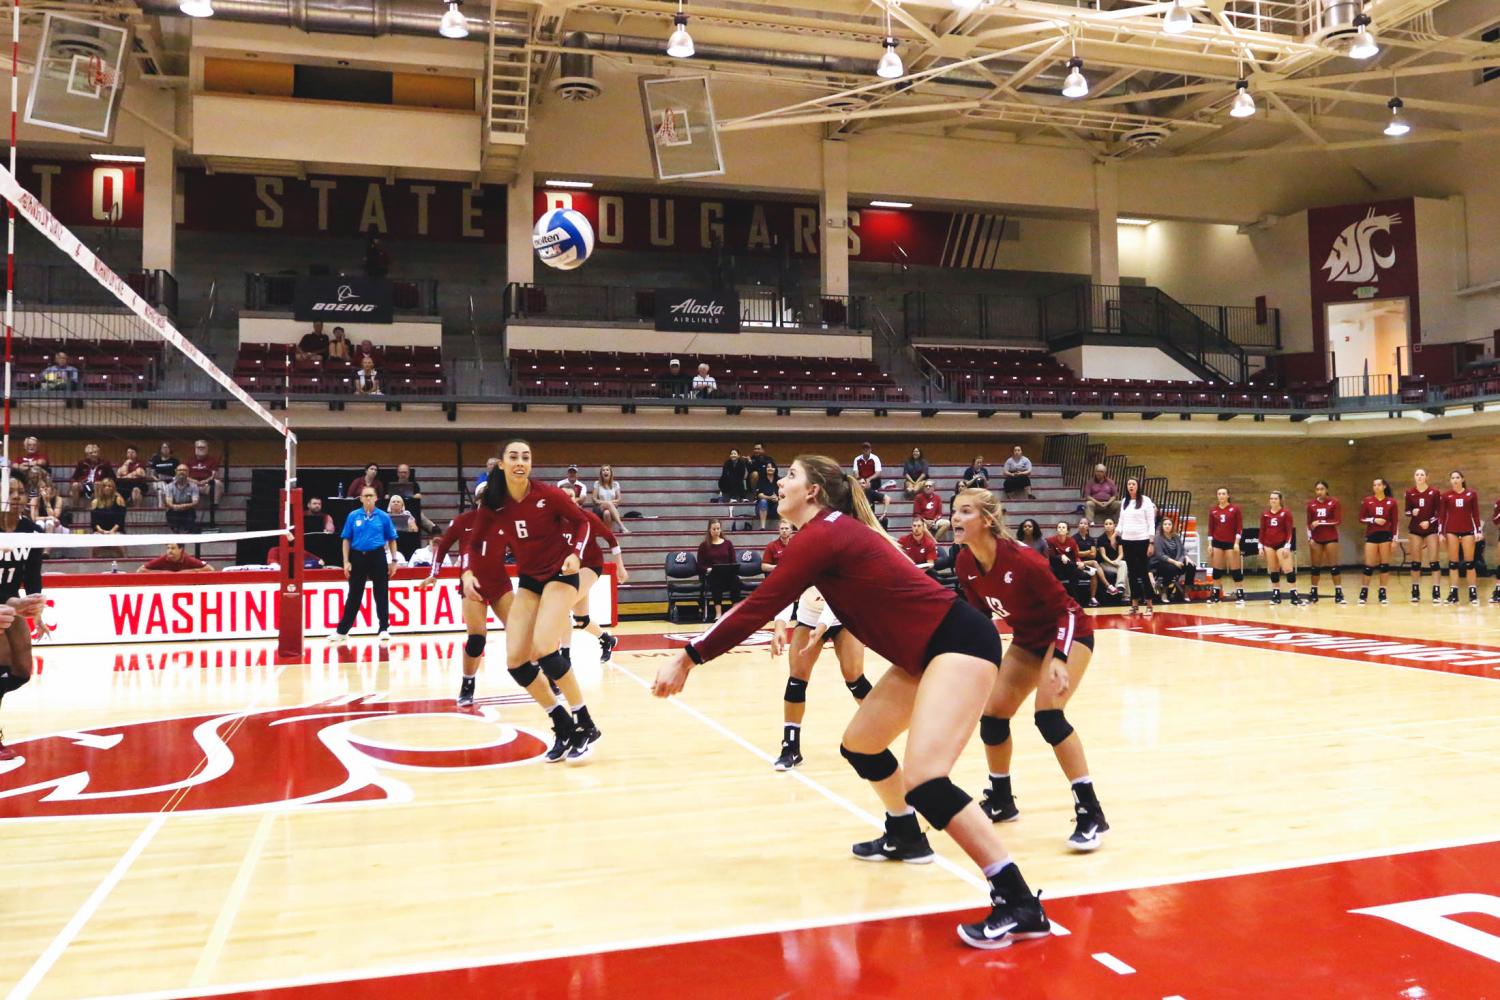 WSU sets up against the Incarnate Word Cardinals for their first game of the Cougar Challenge tournament.  WSU won 3-0.